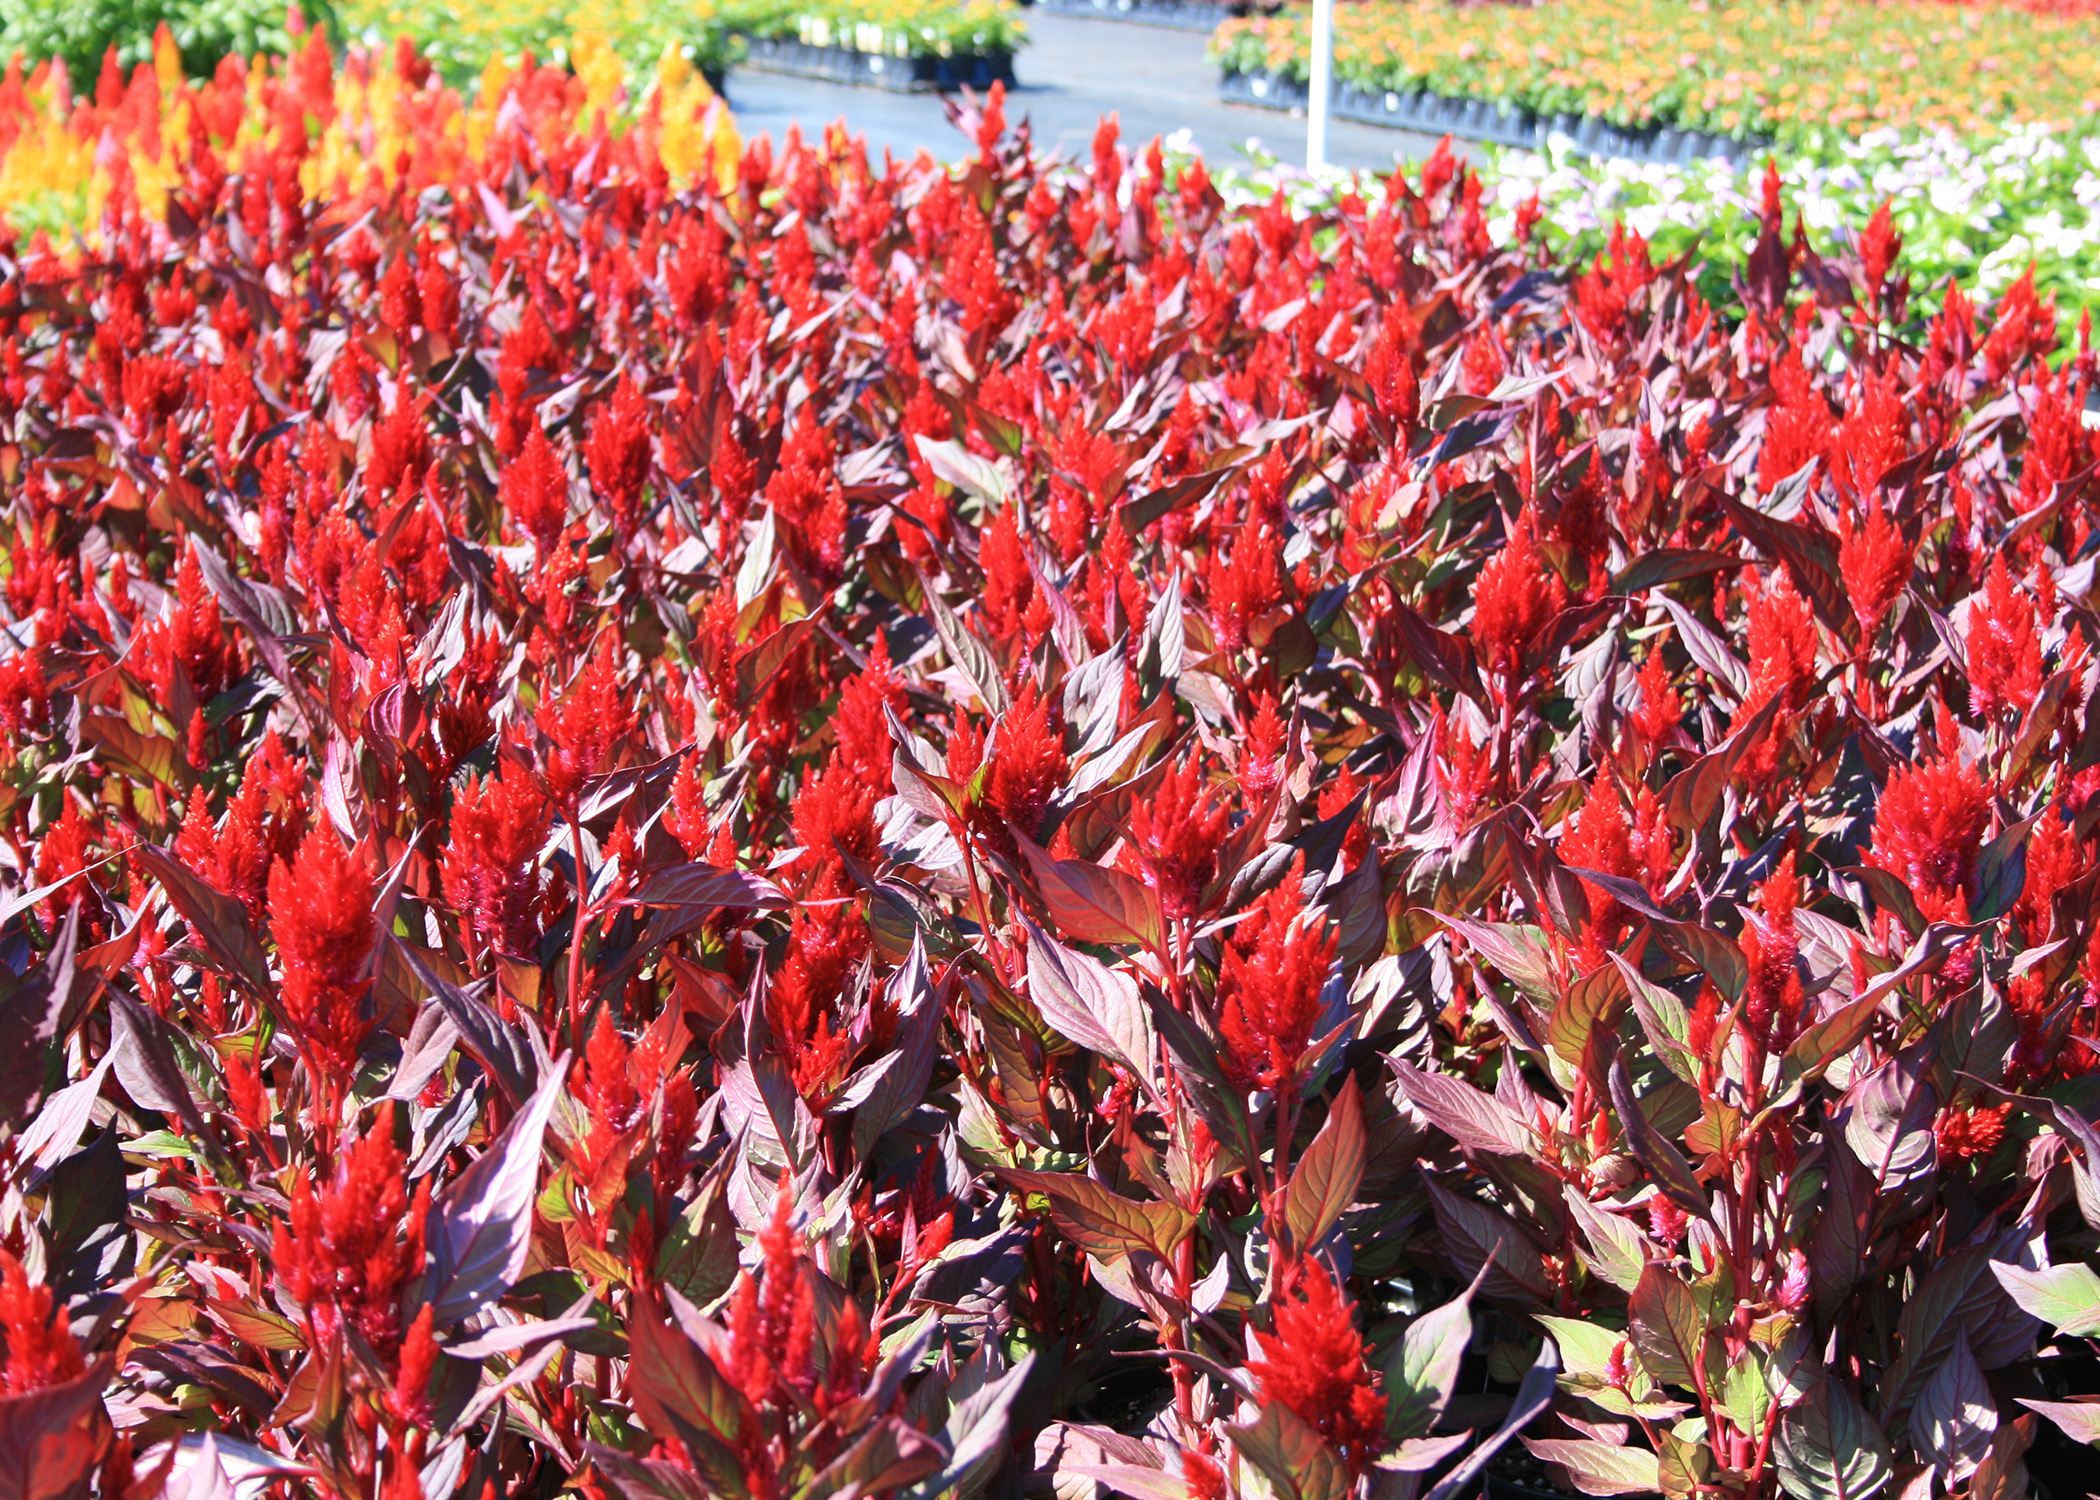 New Look celosia defies the intense heat and humidity of Mississippi summers to produce dark foliage and large plumes of intense colors. (Photo by MSU Extension/Gary Bachman)